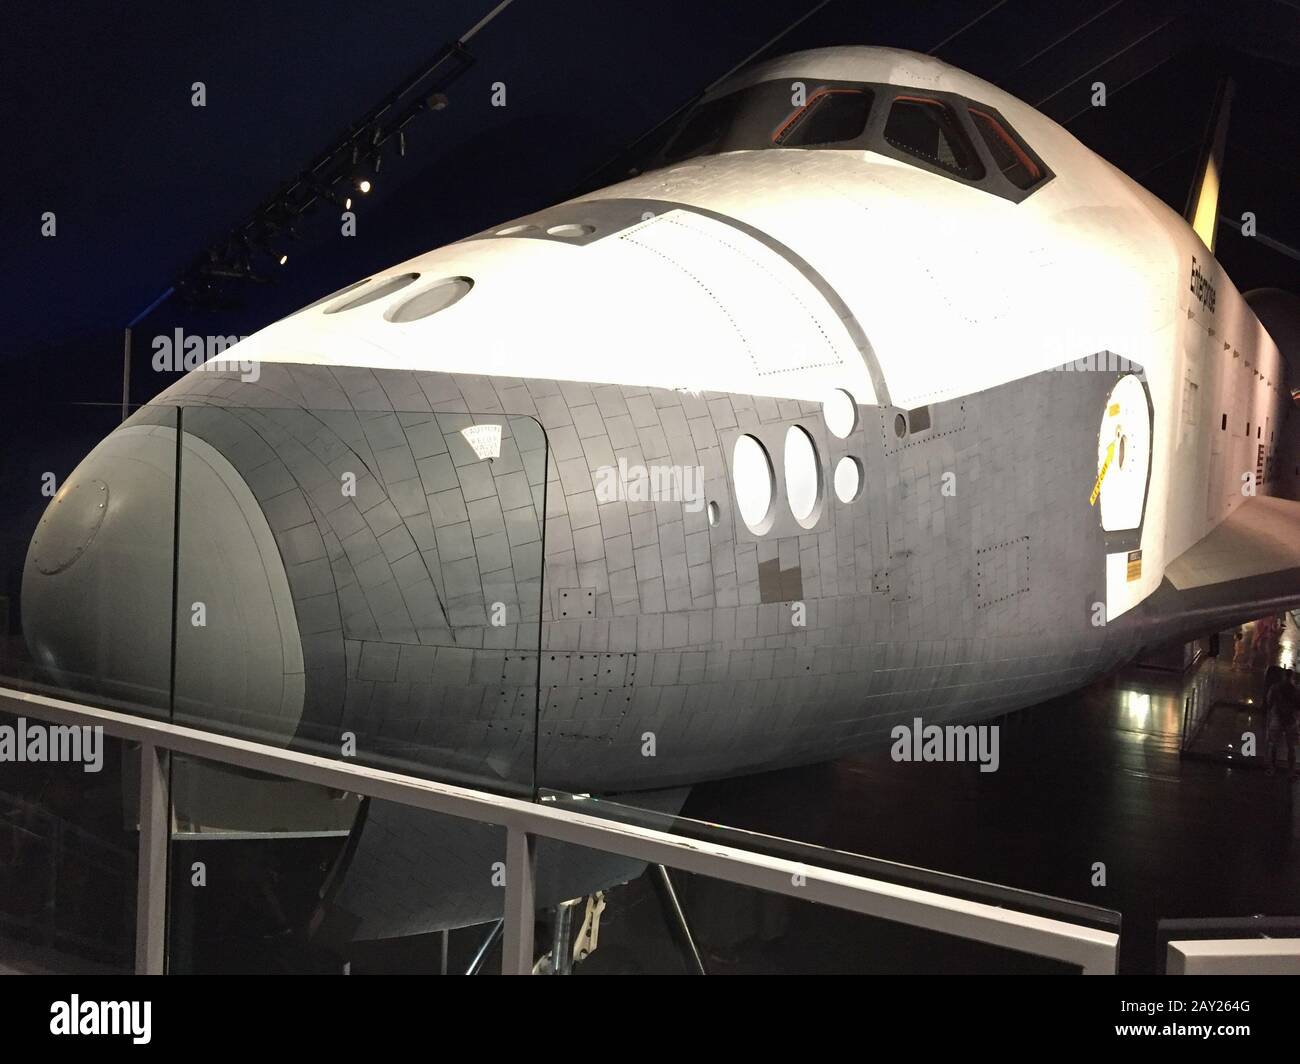 New York, USA - August 20, 2018: View of the Space Shuttle Enterprise on display at the USS Intrepid Sea, Air & Space Museum, a historic aircraft carr Stock Photo